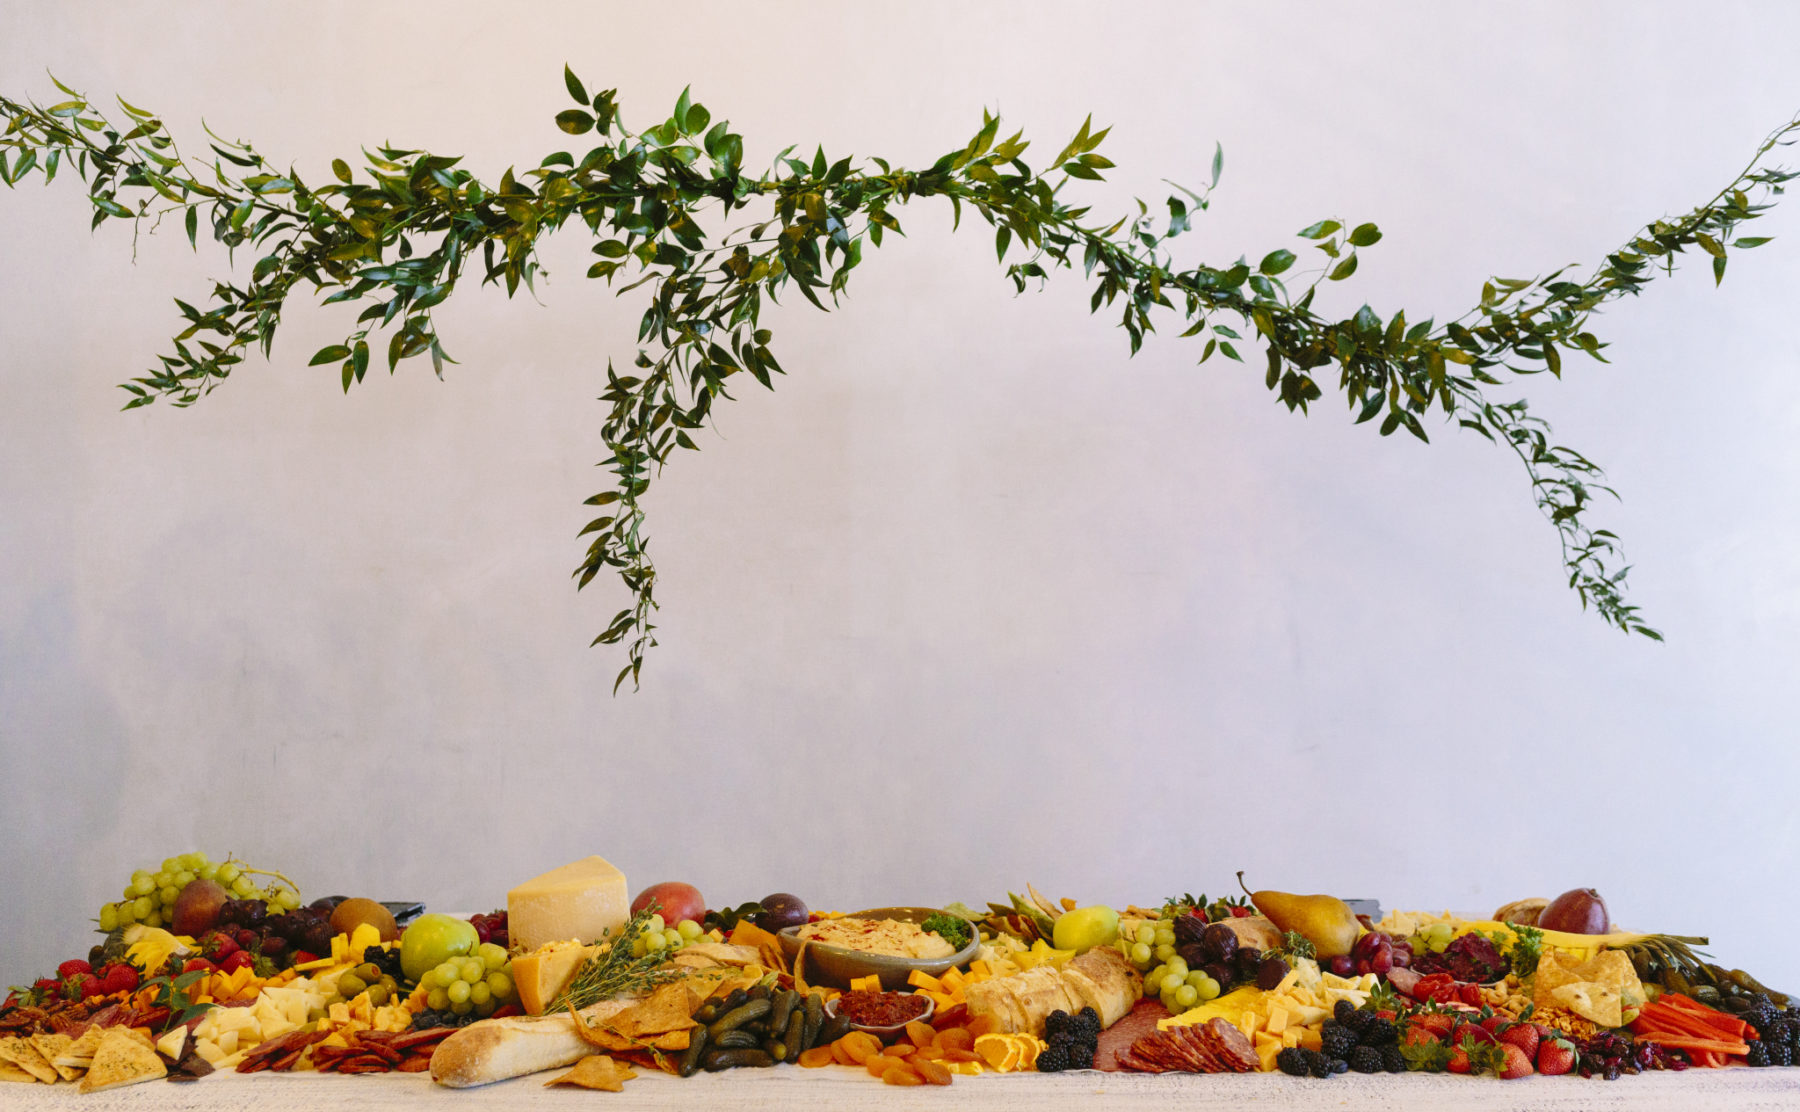 Wedding Food Trends in 2020 from Chef's Market featured on Nashville Bride Guide